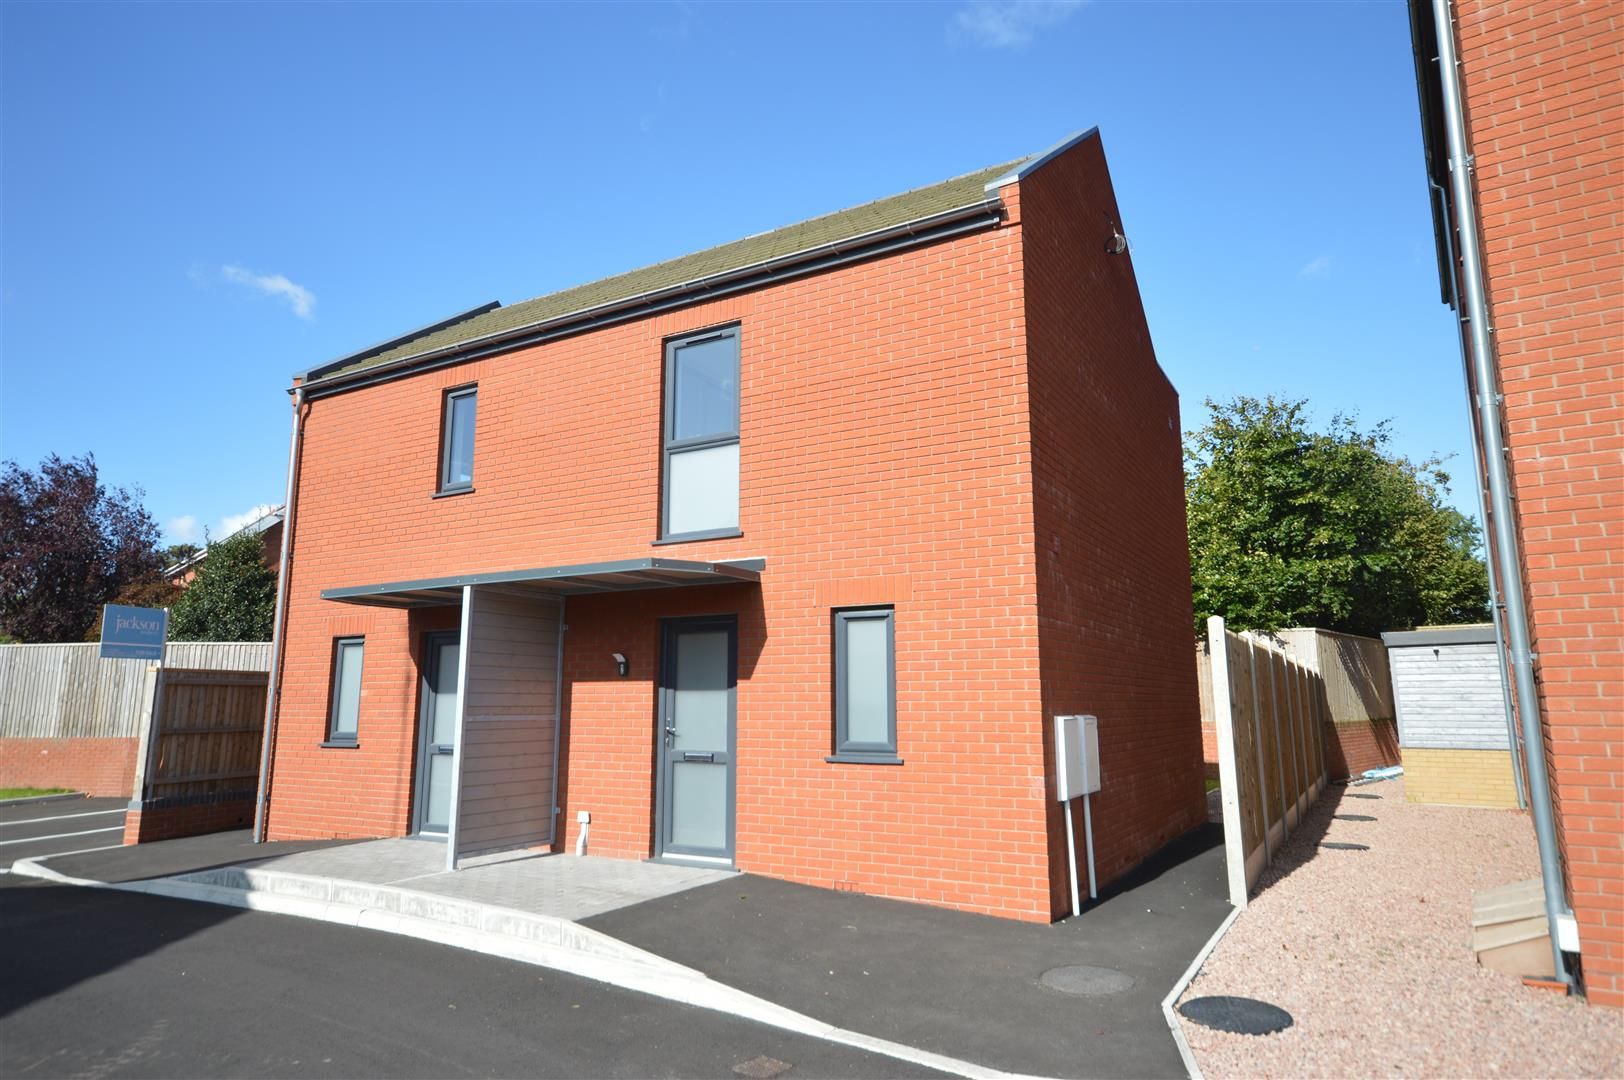 2 bed semi-detached for sale in Leominster 1